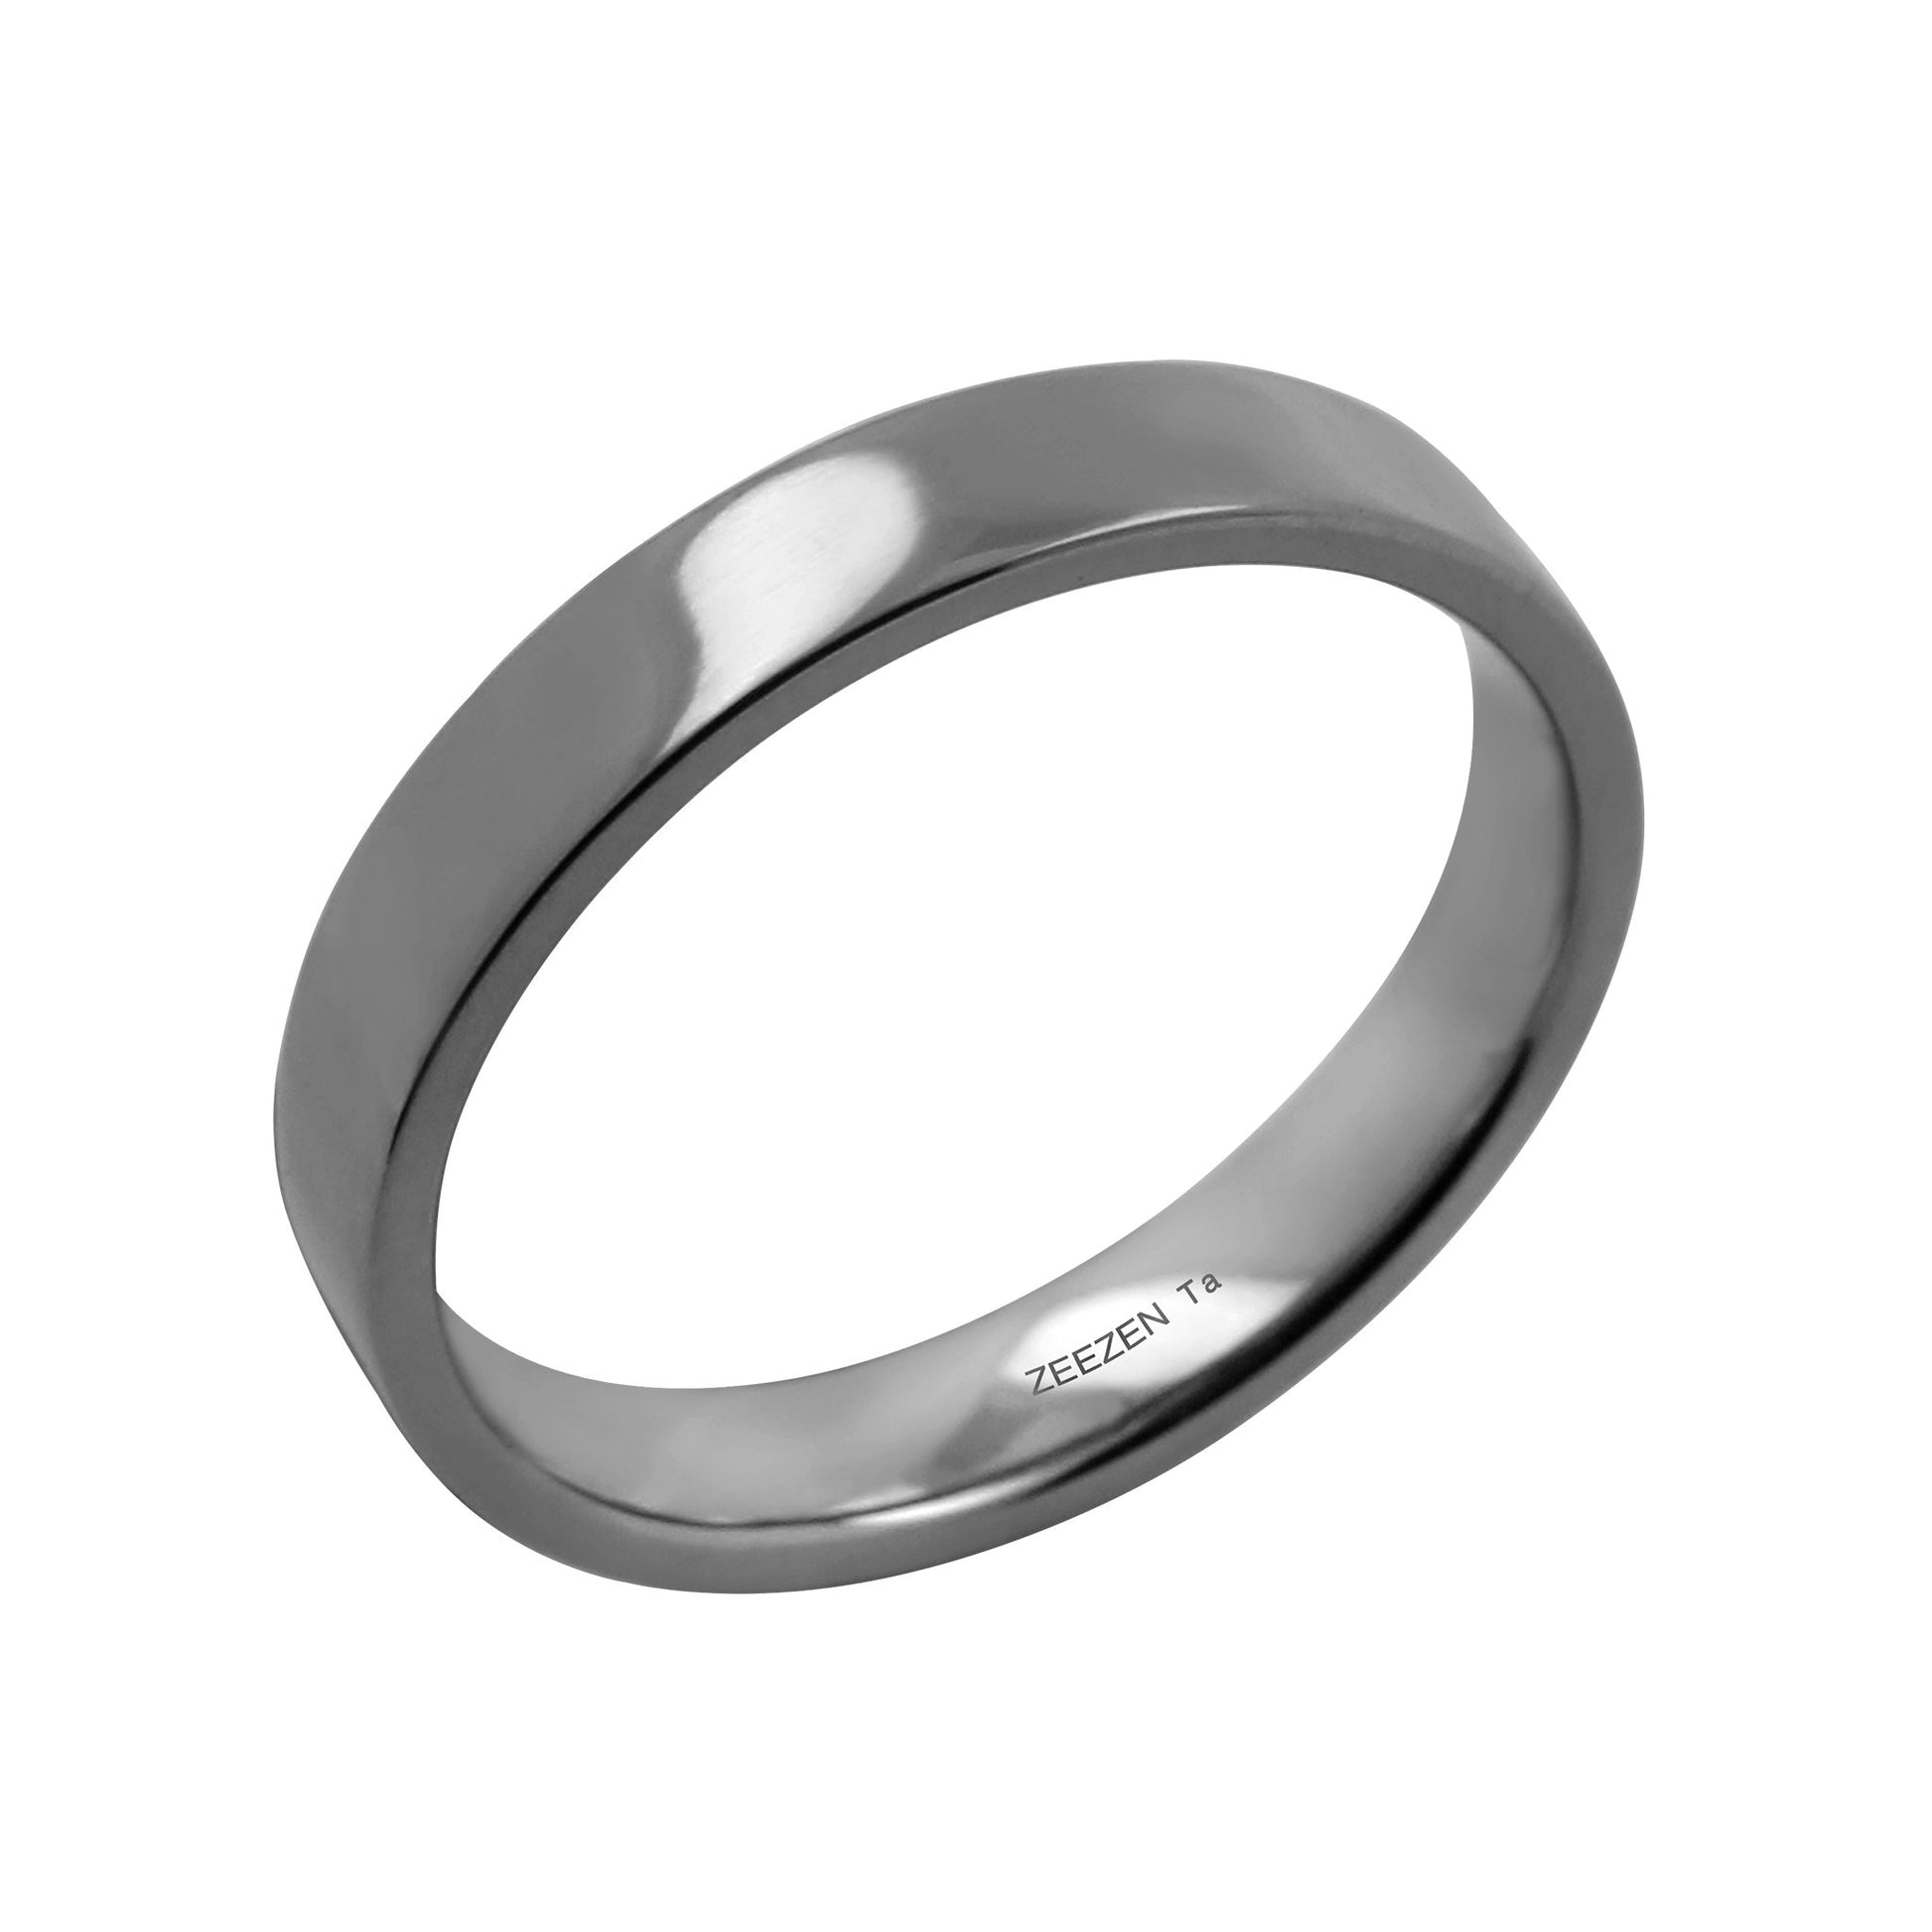 Tantalum Ring w/o min. Polished Ring profile: width: 4.0 mm || height: 1.6 mm. Side view